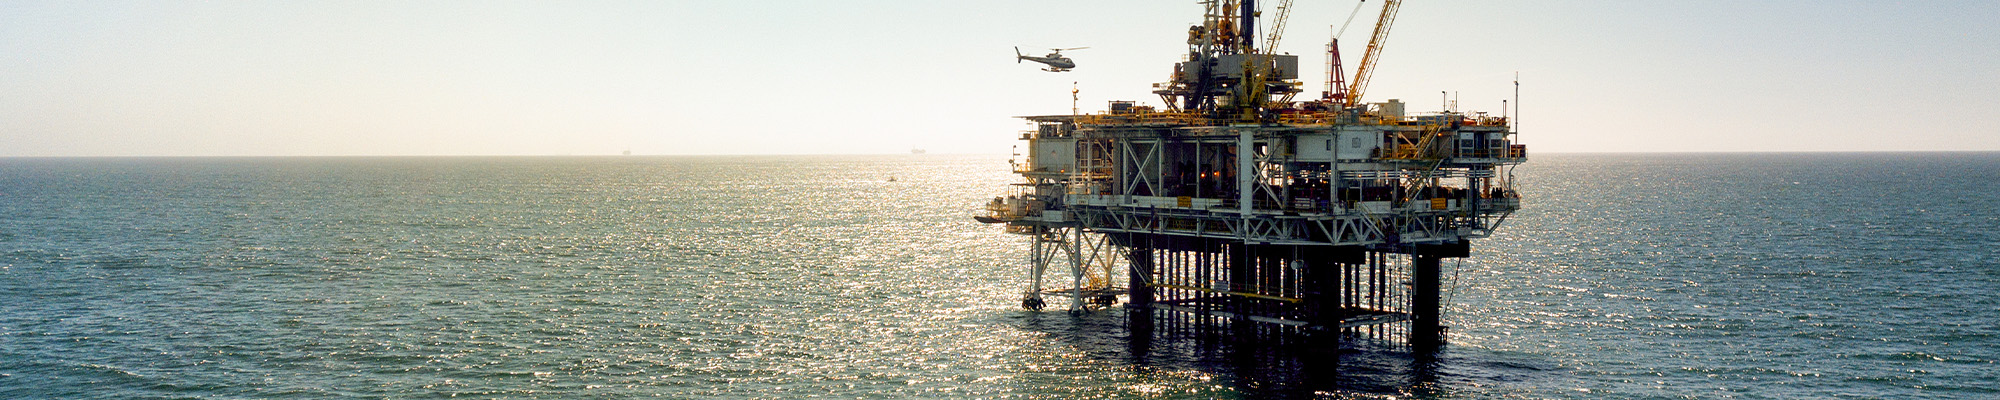 Photo of an offshore oil rig/platform